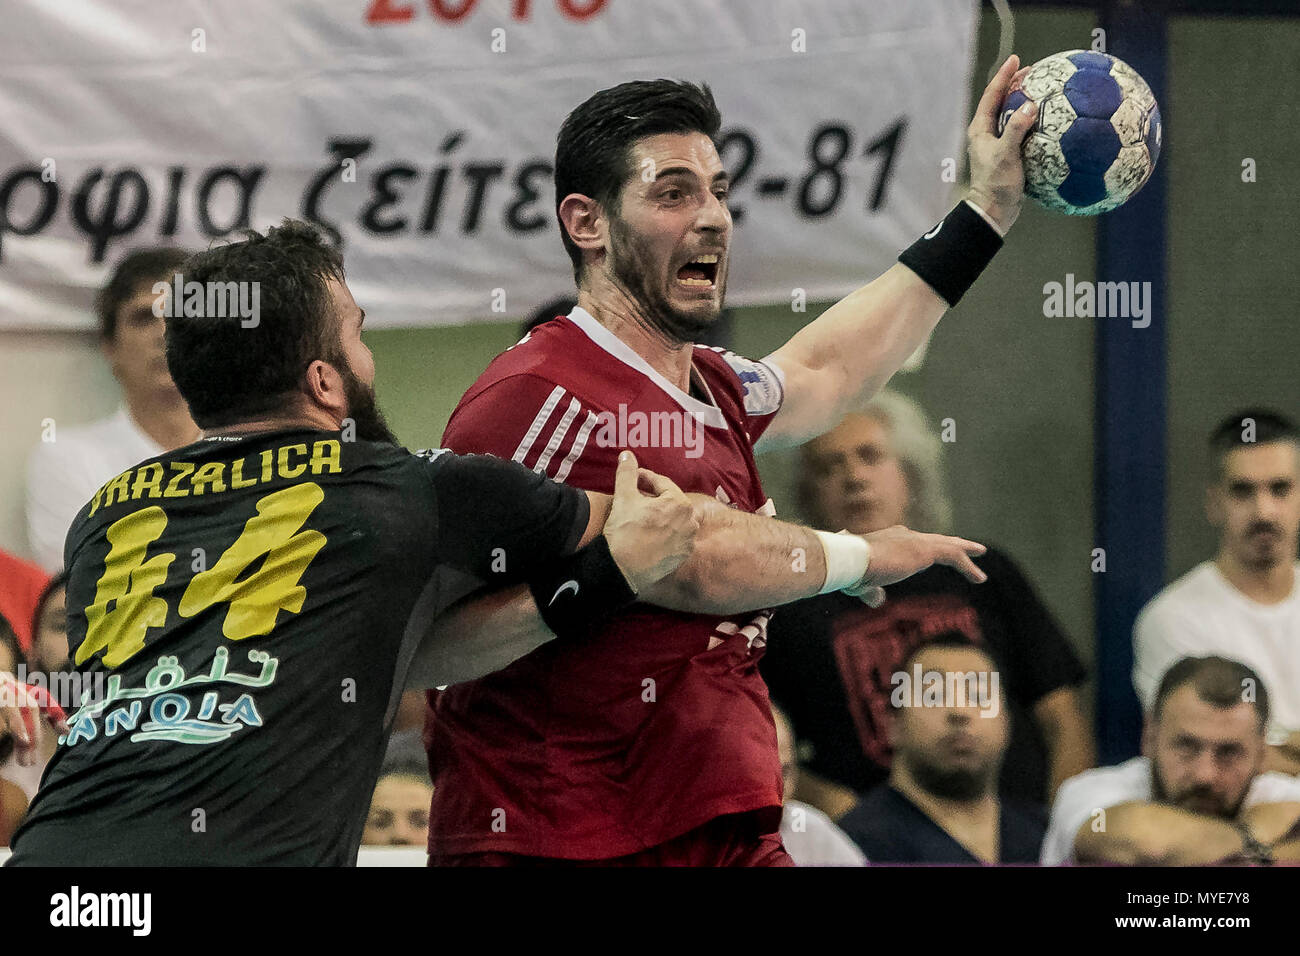 Athens, Greece. 6th June, 2018. Olympiacos' Alexandros Alvanos (R) breaks  through during the Greek Men's Handball Championship Final between AEK and  Olympiacos in Athens, Greece, June 6, 2018. Credit: Panagiotis  Moschandreou/Xinhua/Alamy Live